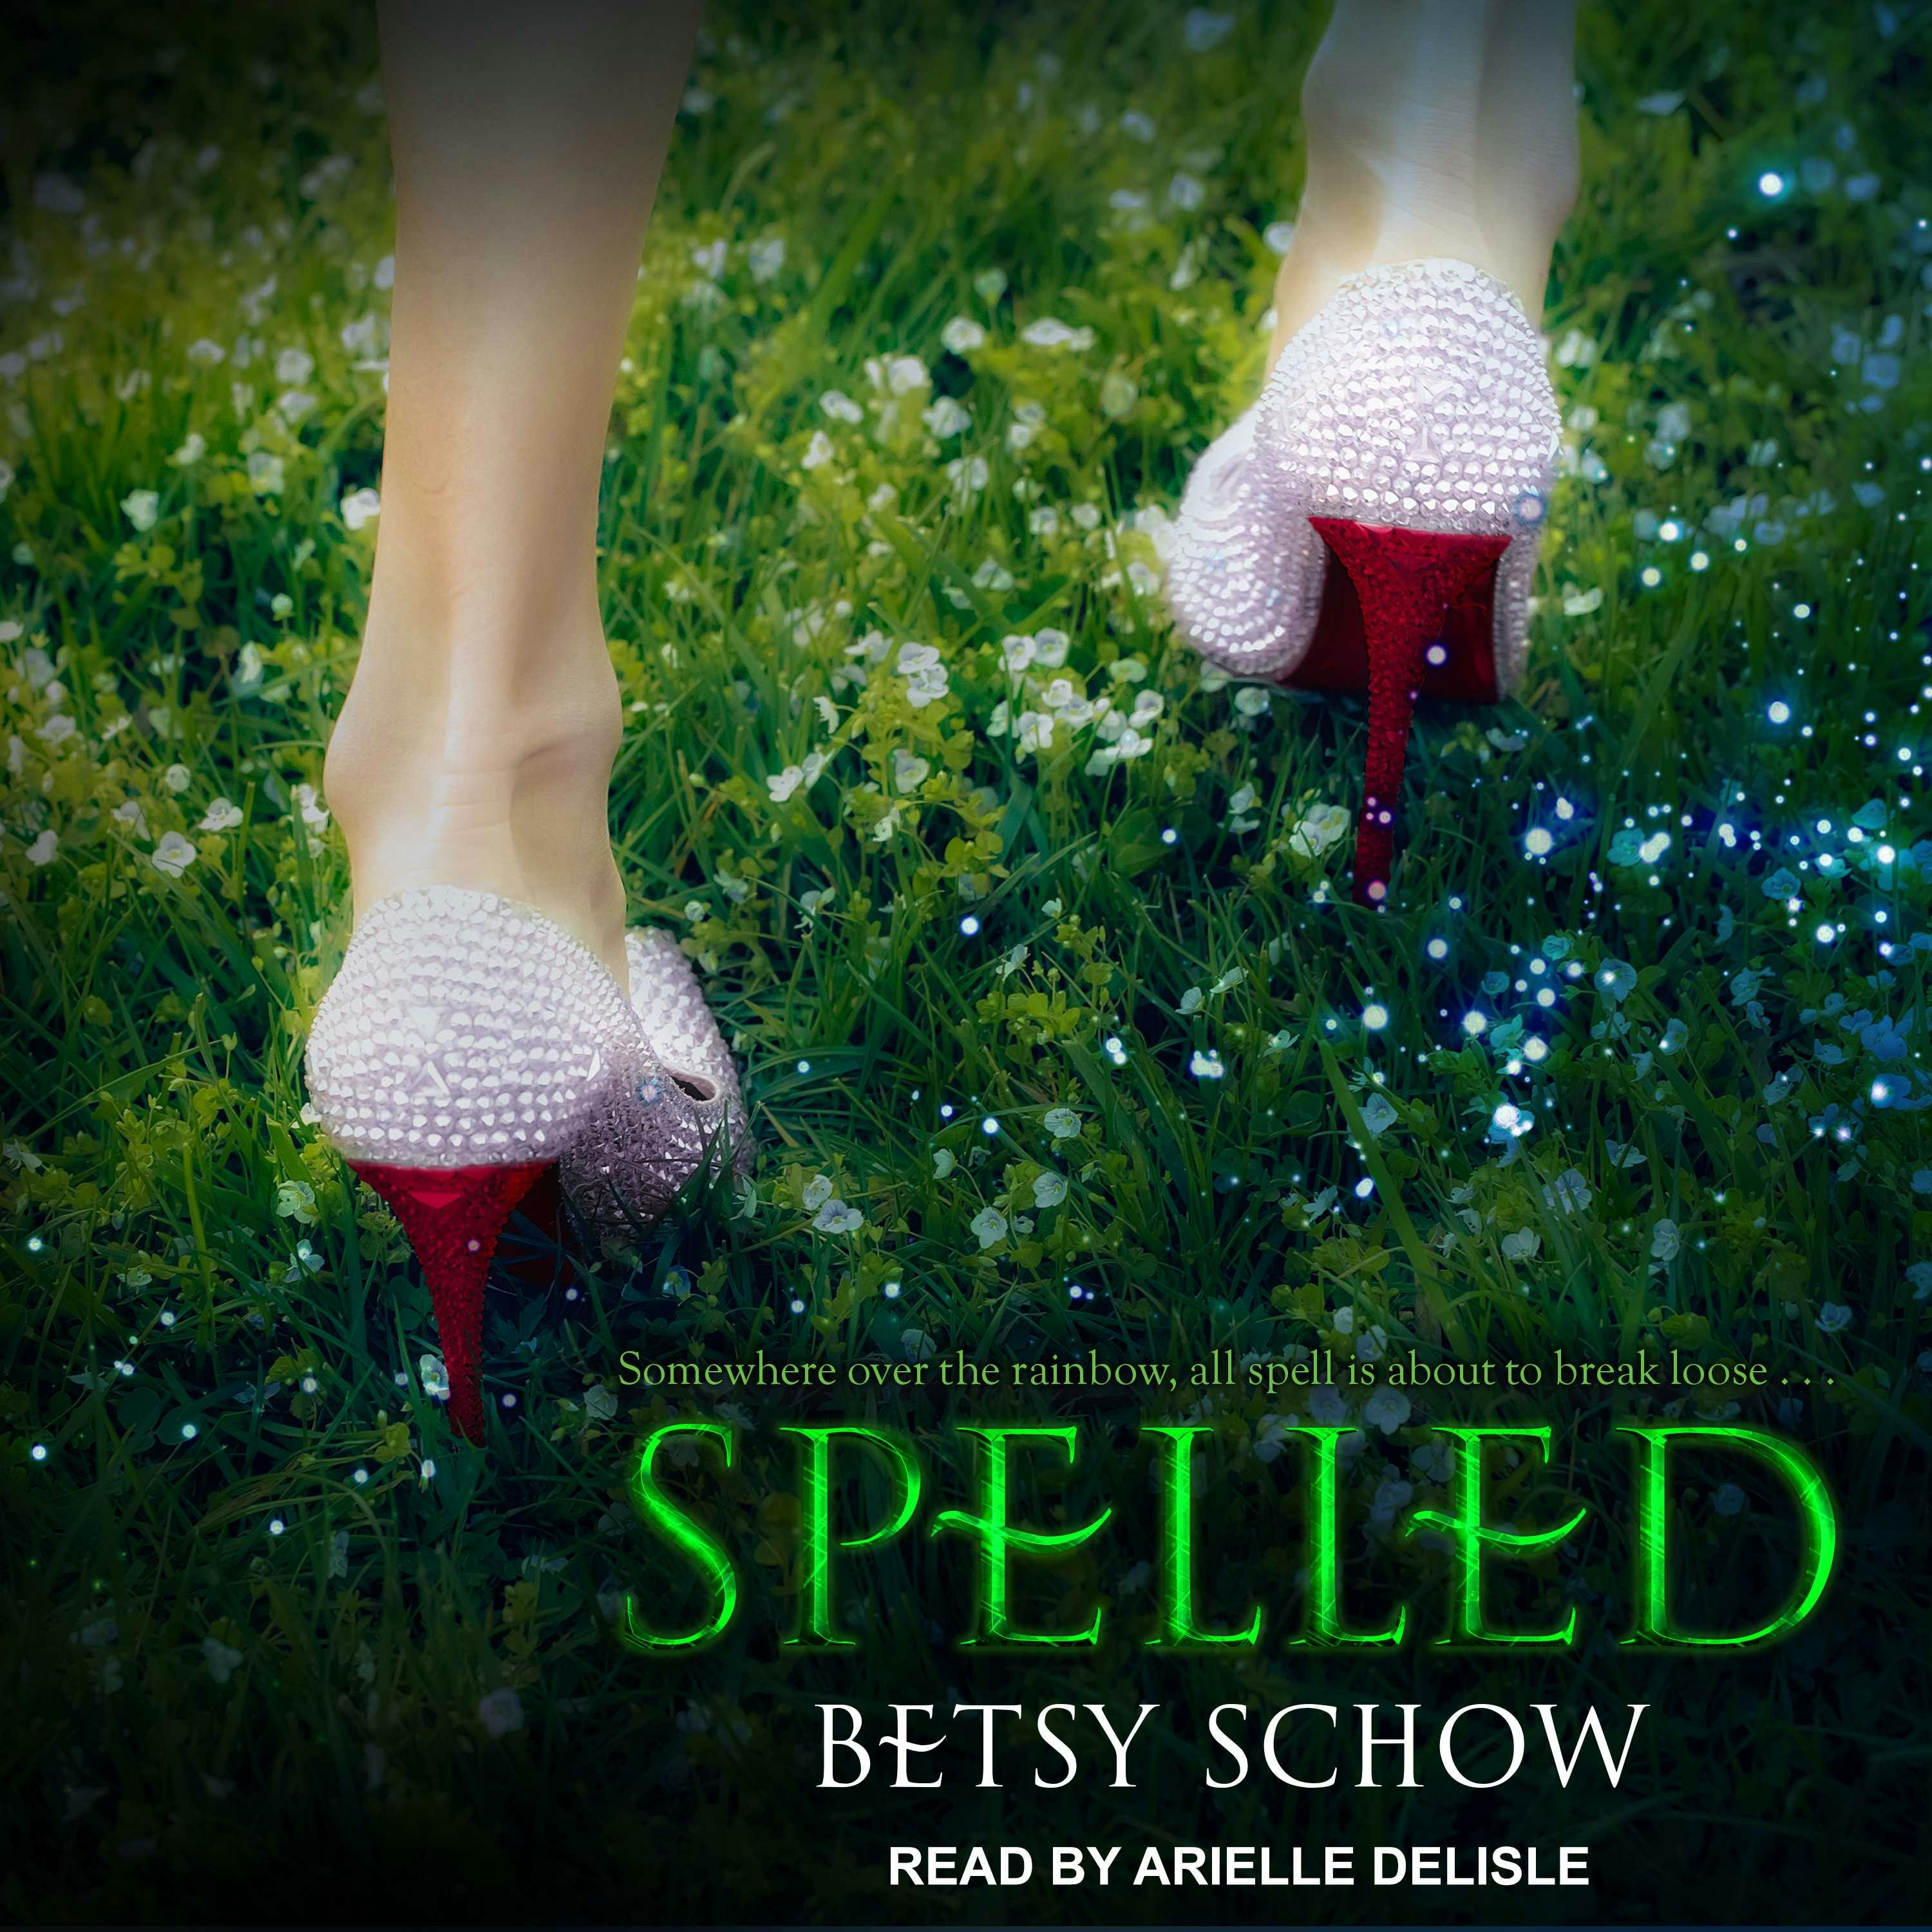 Spelled - Betsy Schow